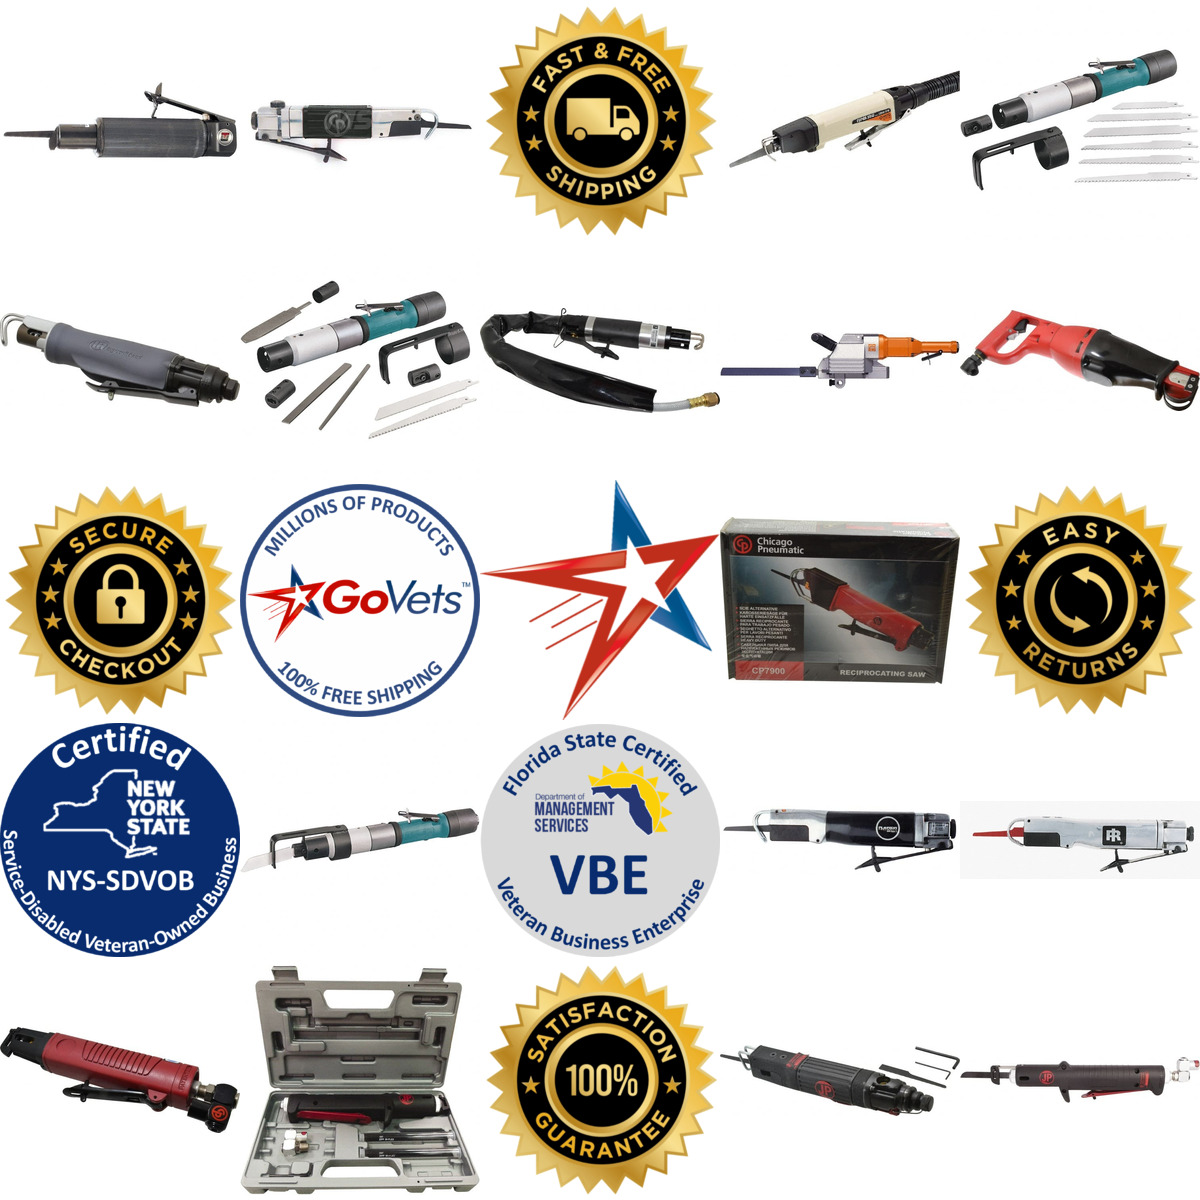 A selection of Air Reciprocating Saws products on GoVets